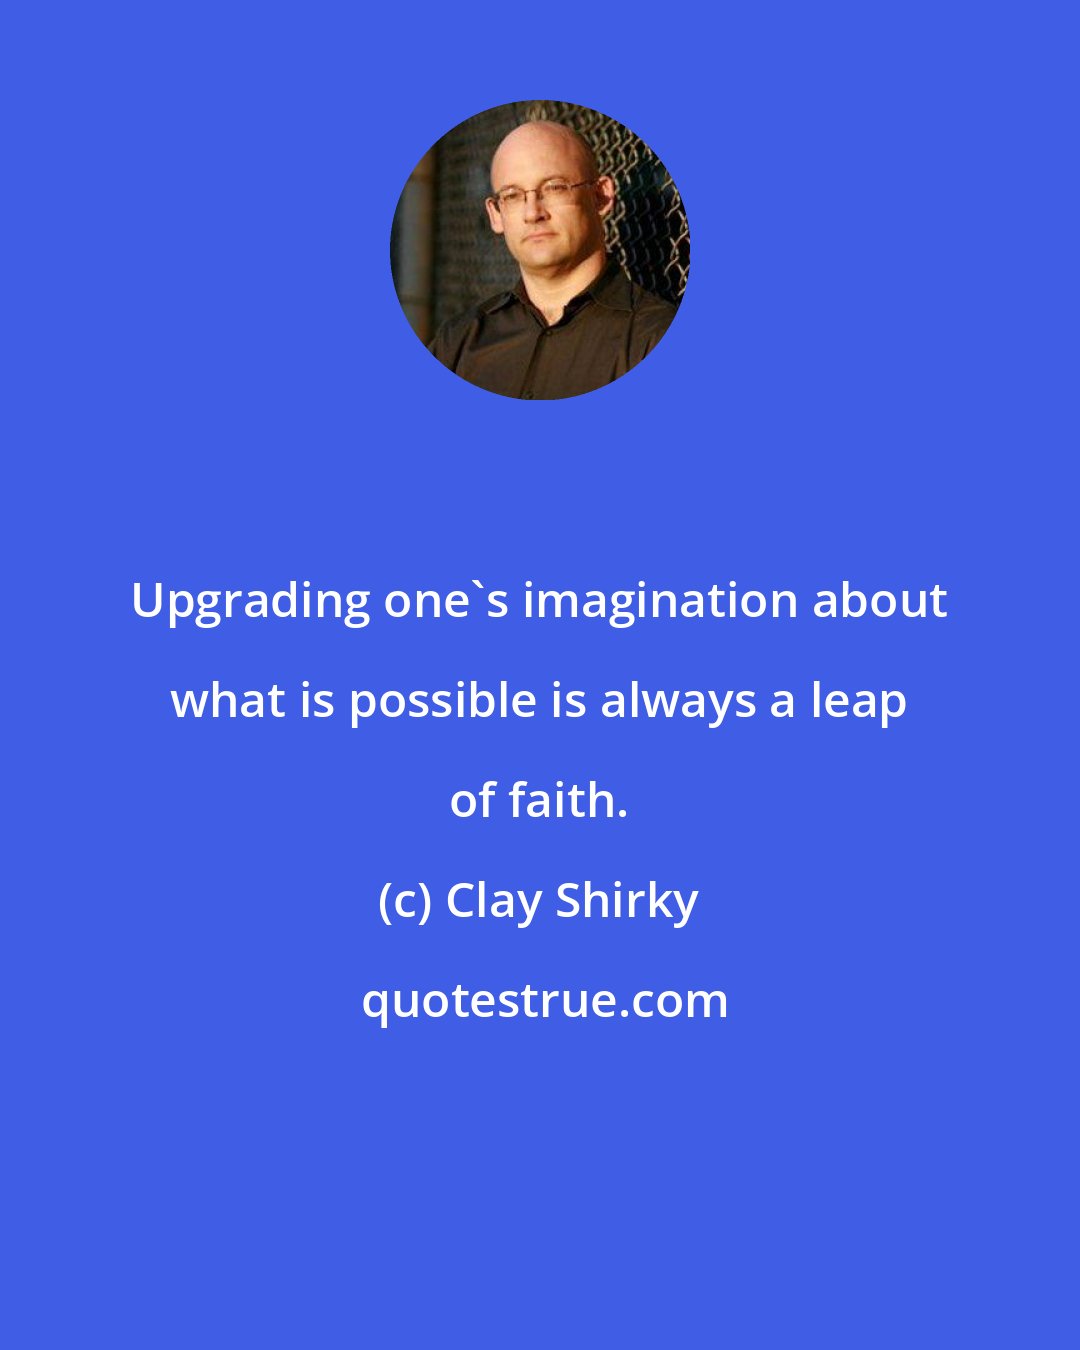 Clay Shirky: Upgrading one's imagination about what is possible is always a leap of faith.